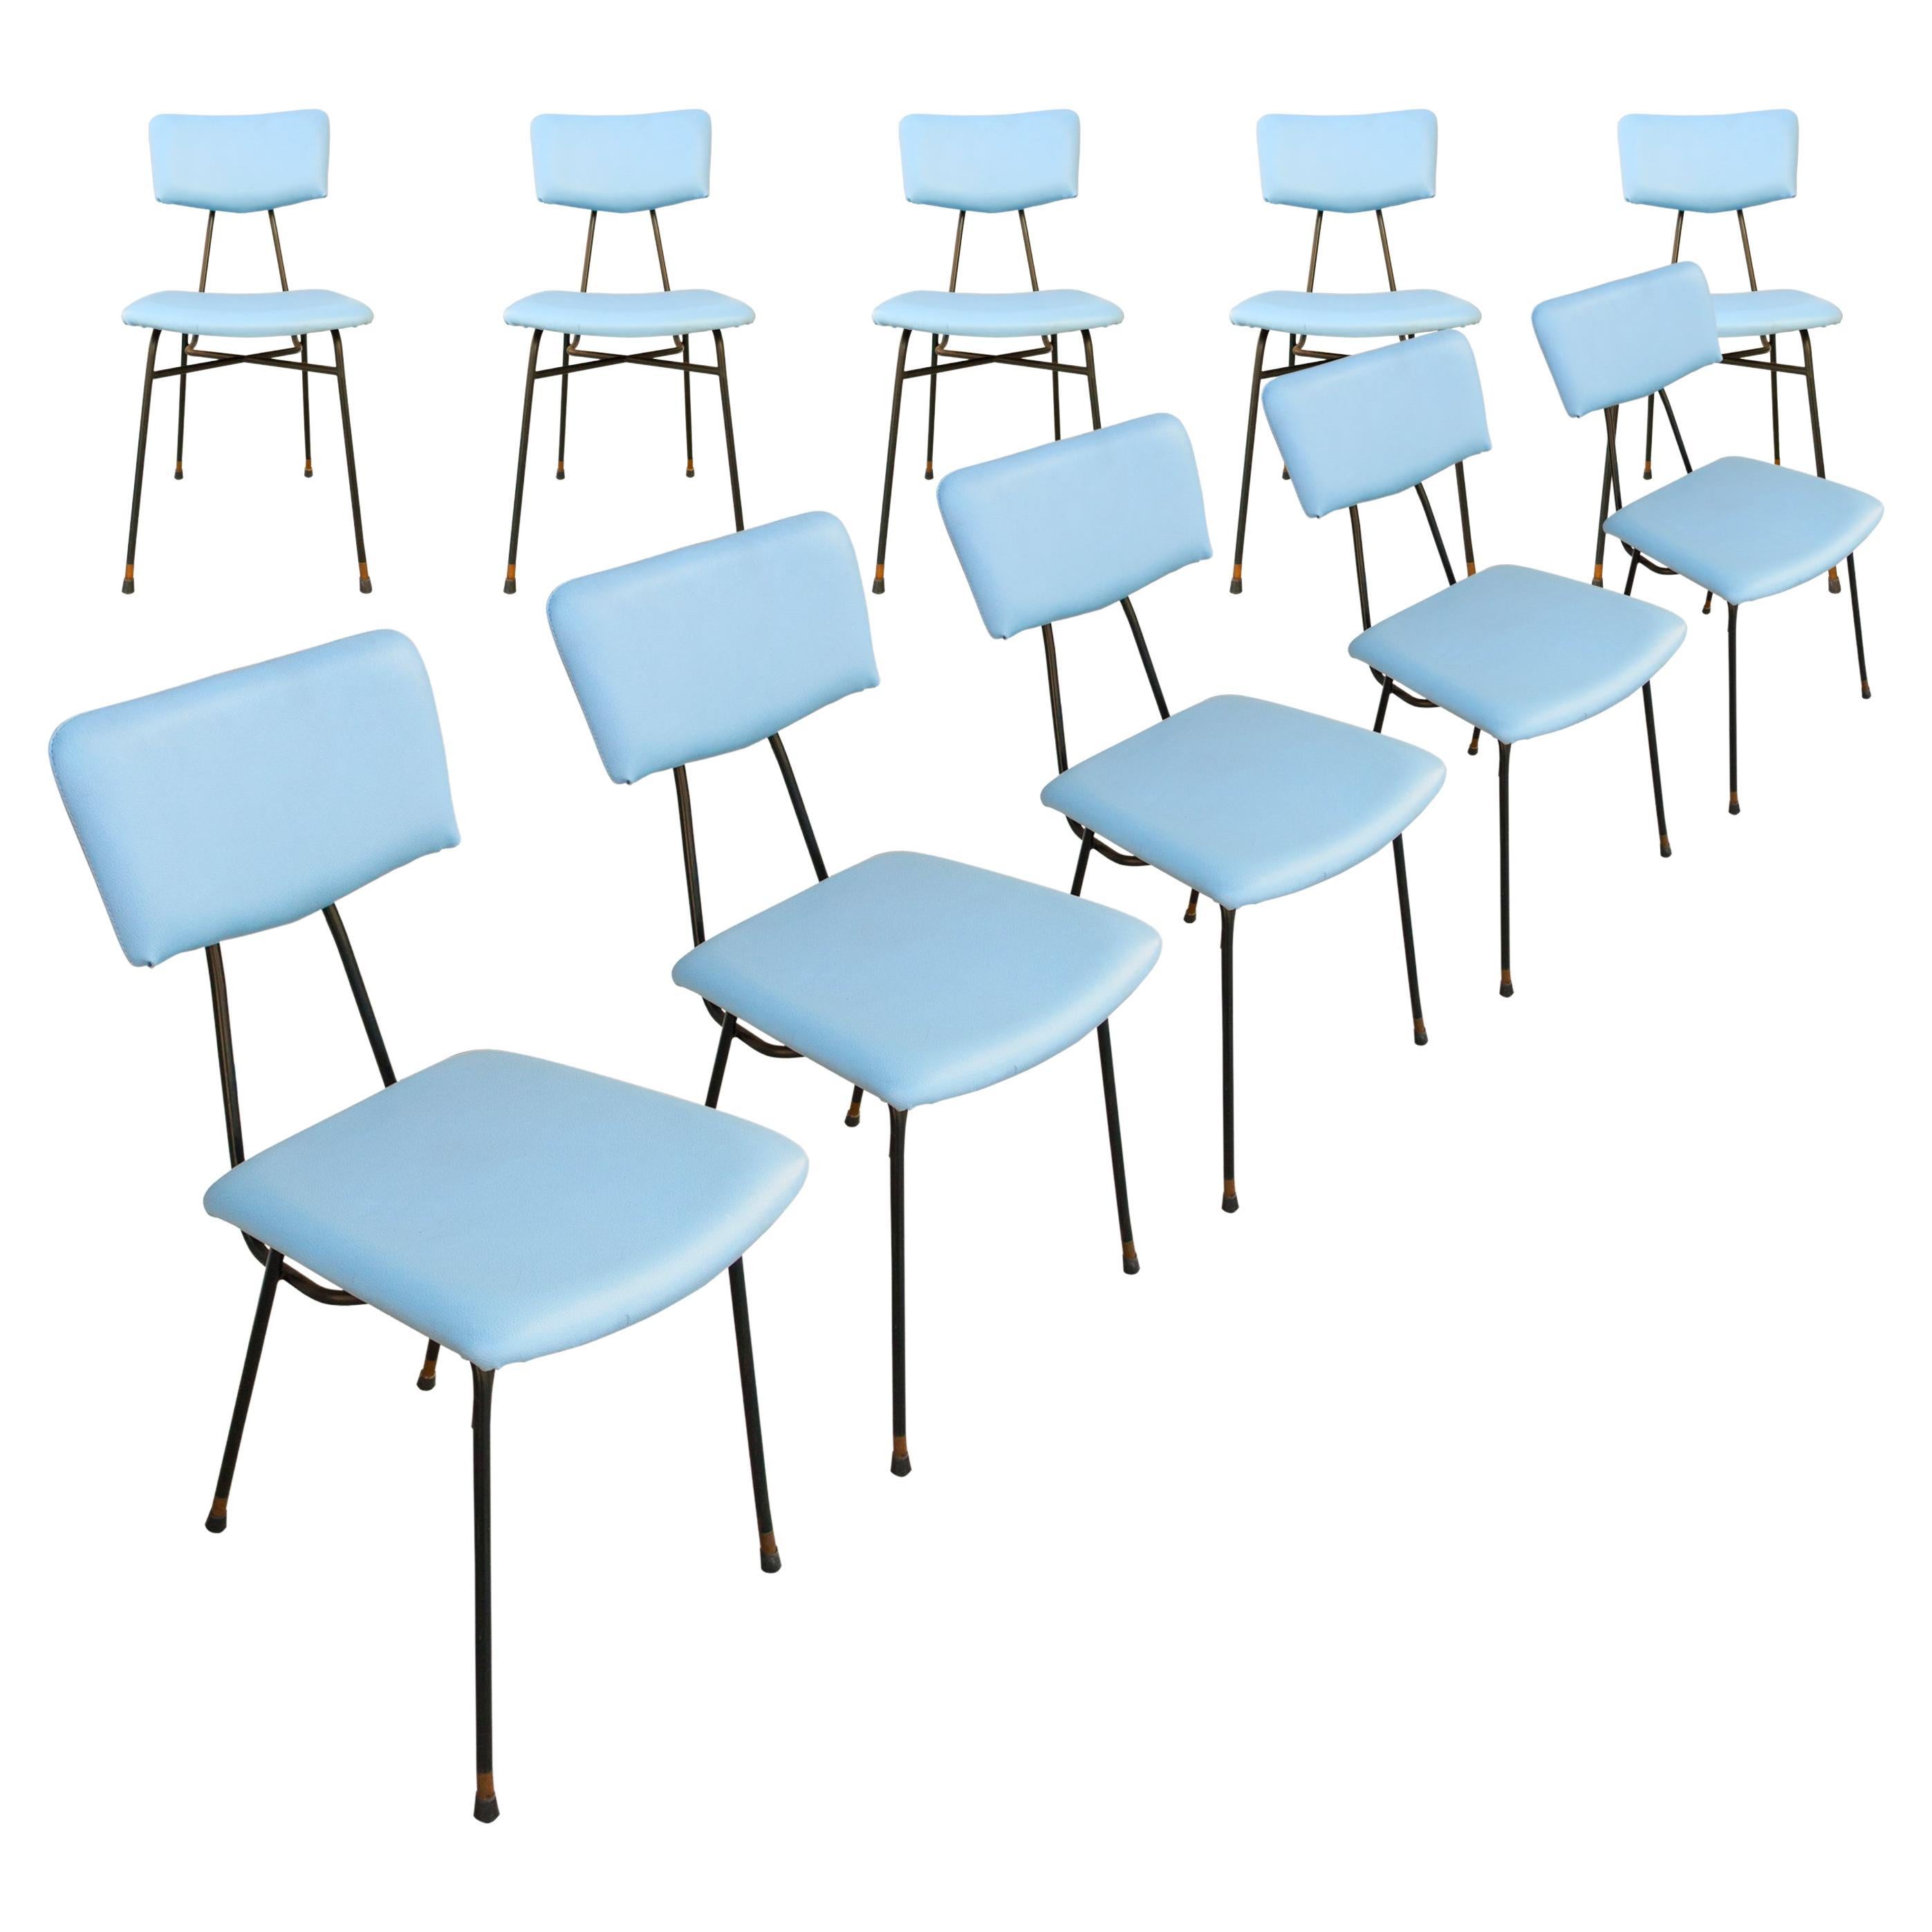 Luigi Scremin 10 Chairs Set Blue Leatherette and Melalic Structure, Italy, 1950 For Sale